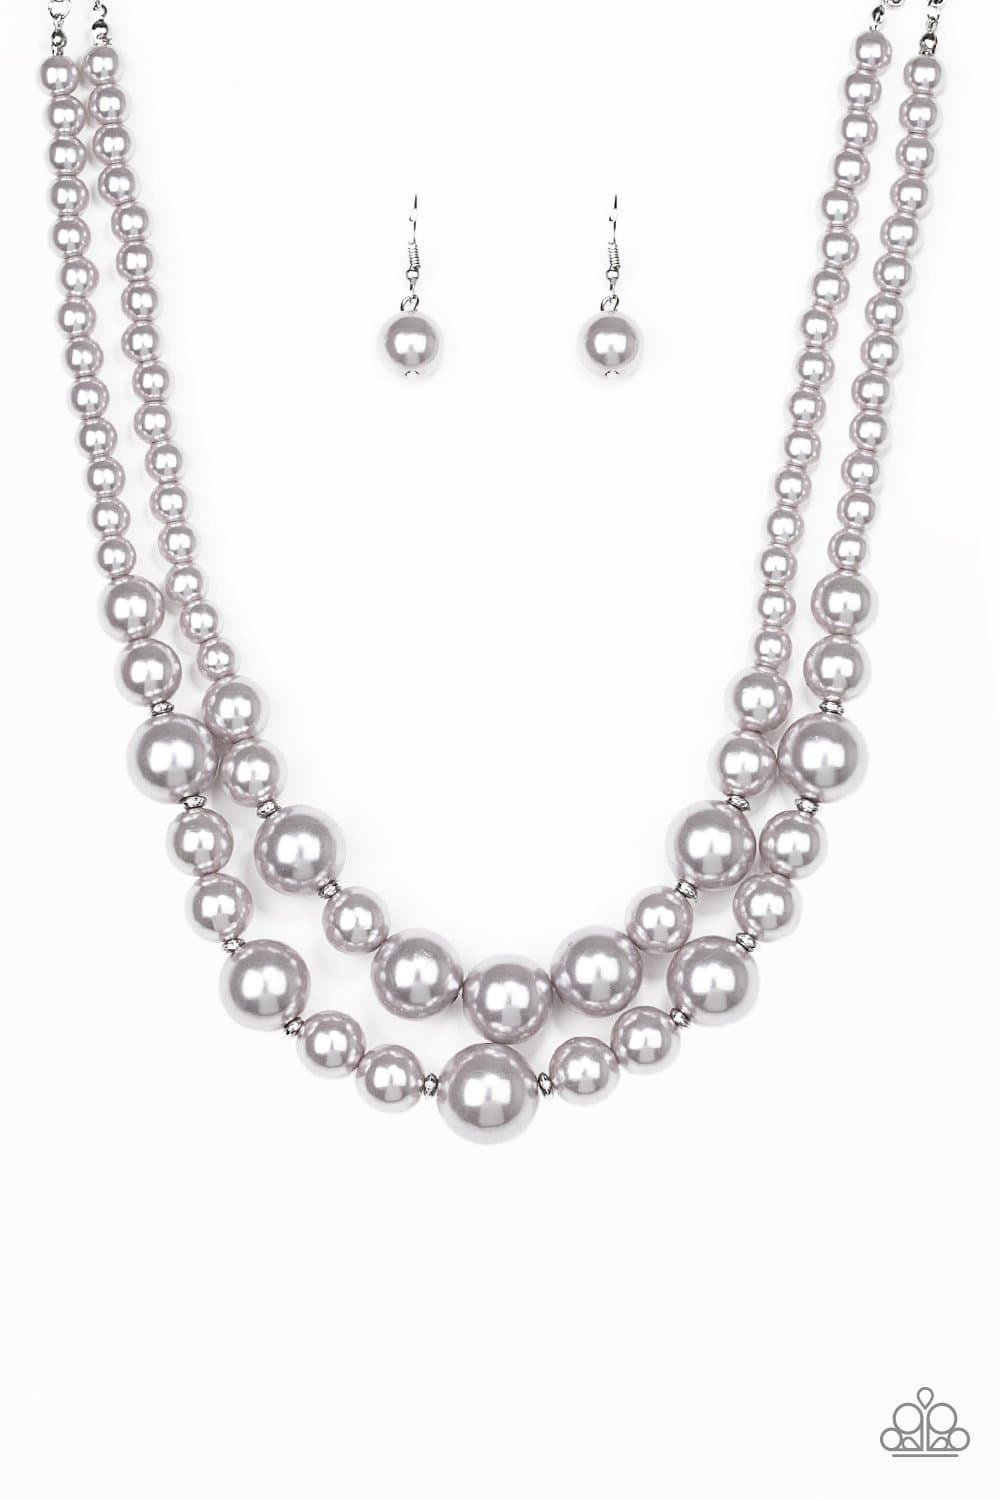 The More The Modest - Silver Pearl Necklace - Paparazzi Accessories - GlaMarous Titi Jewels